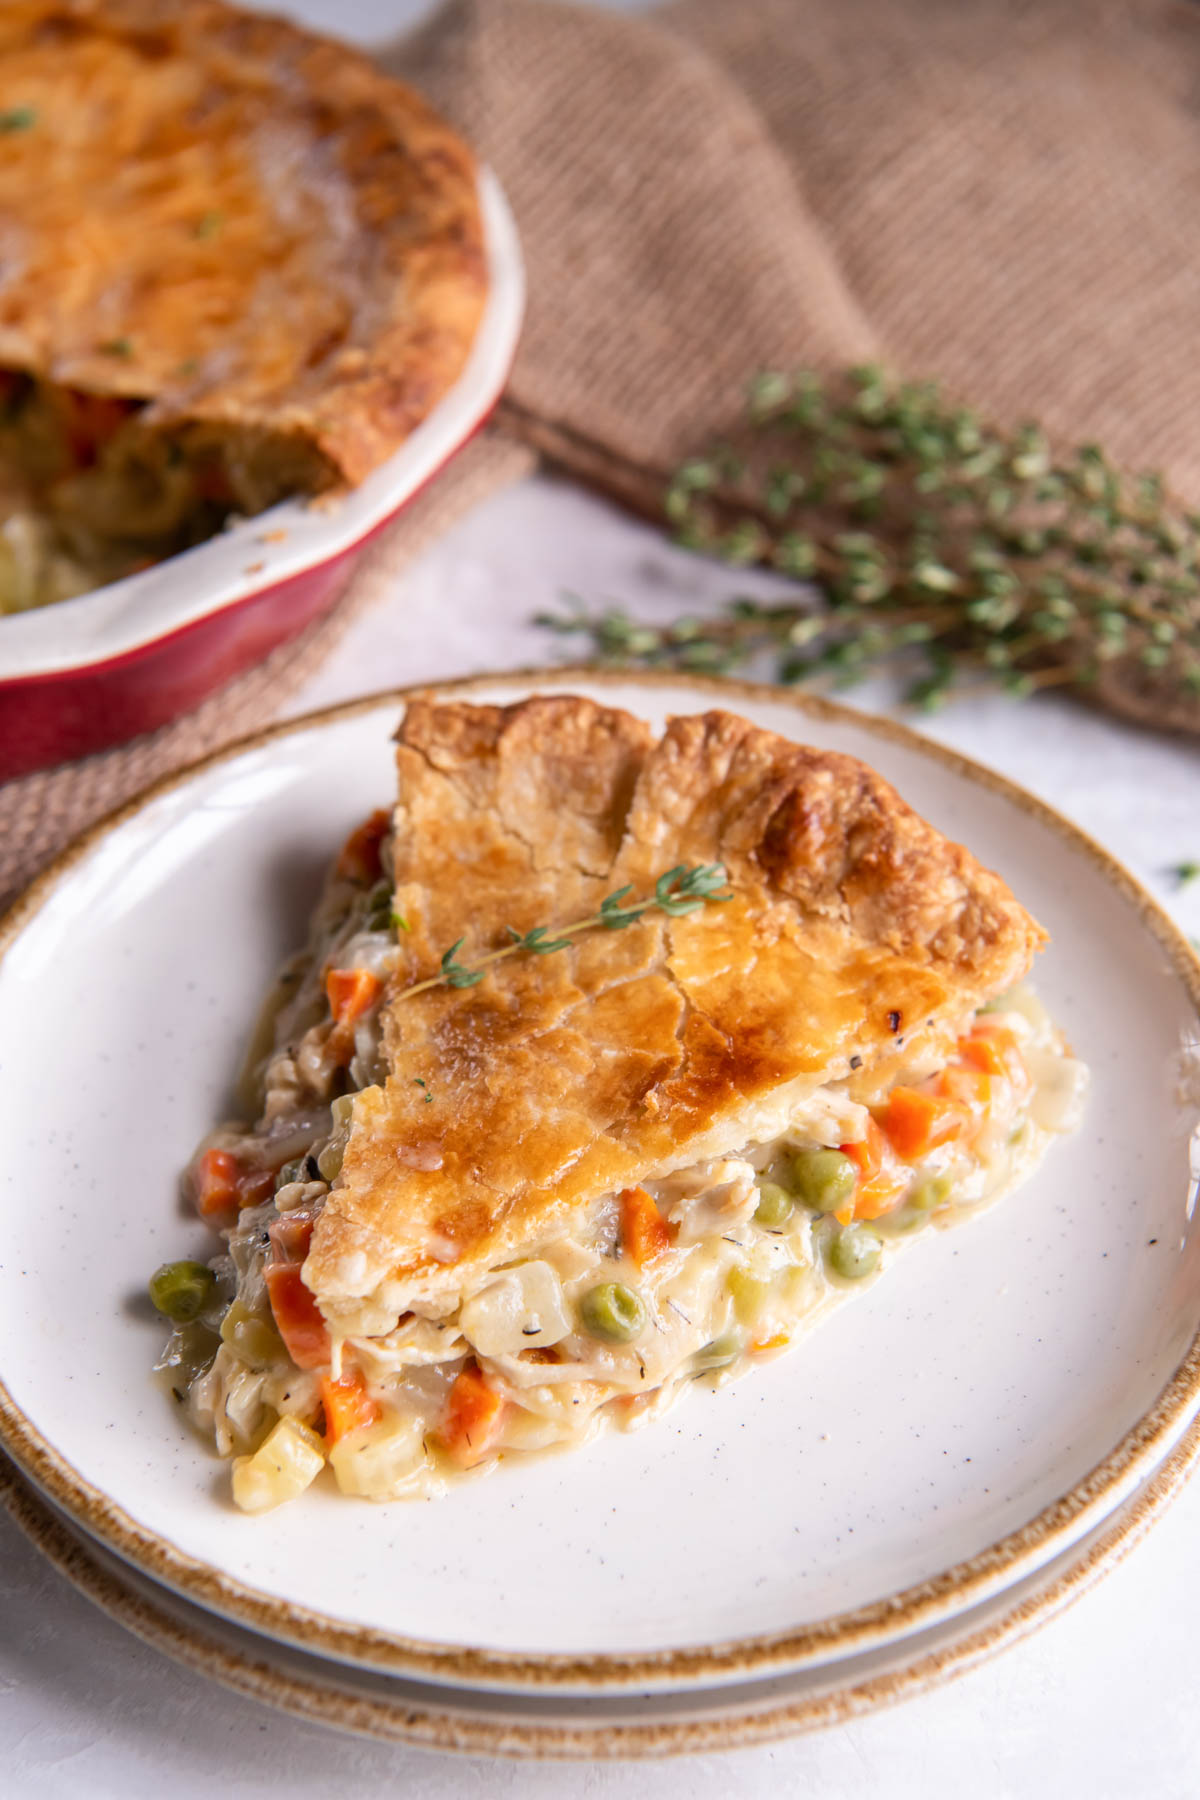 Slice of chicken pot pie on a plate.